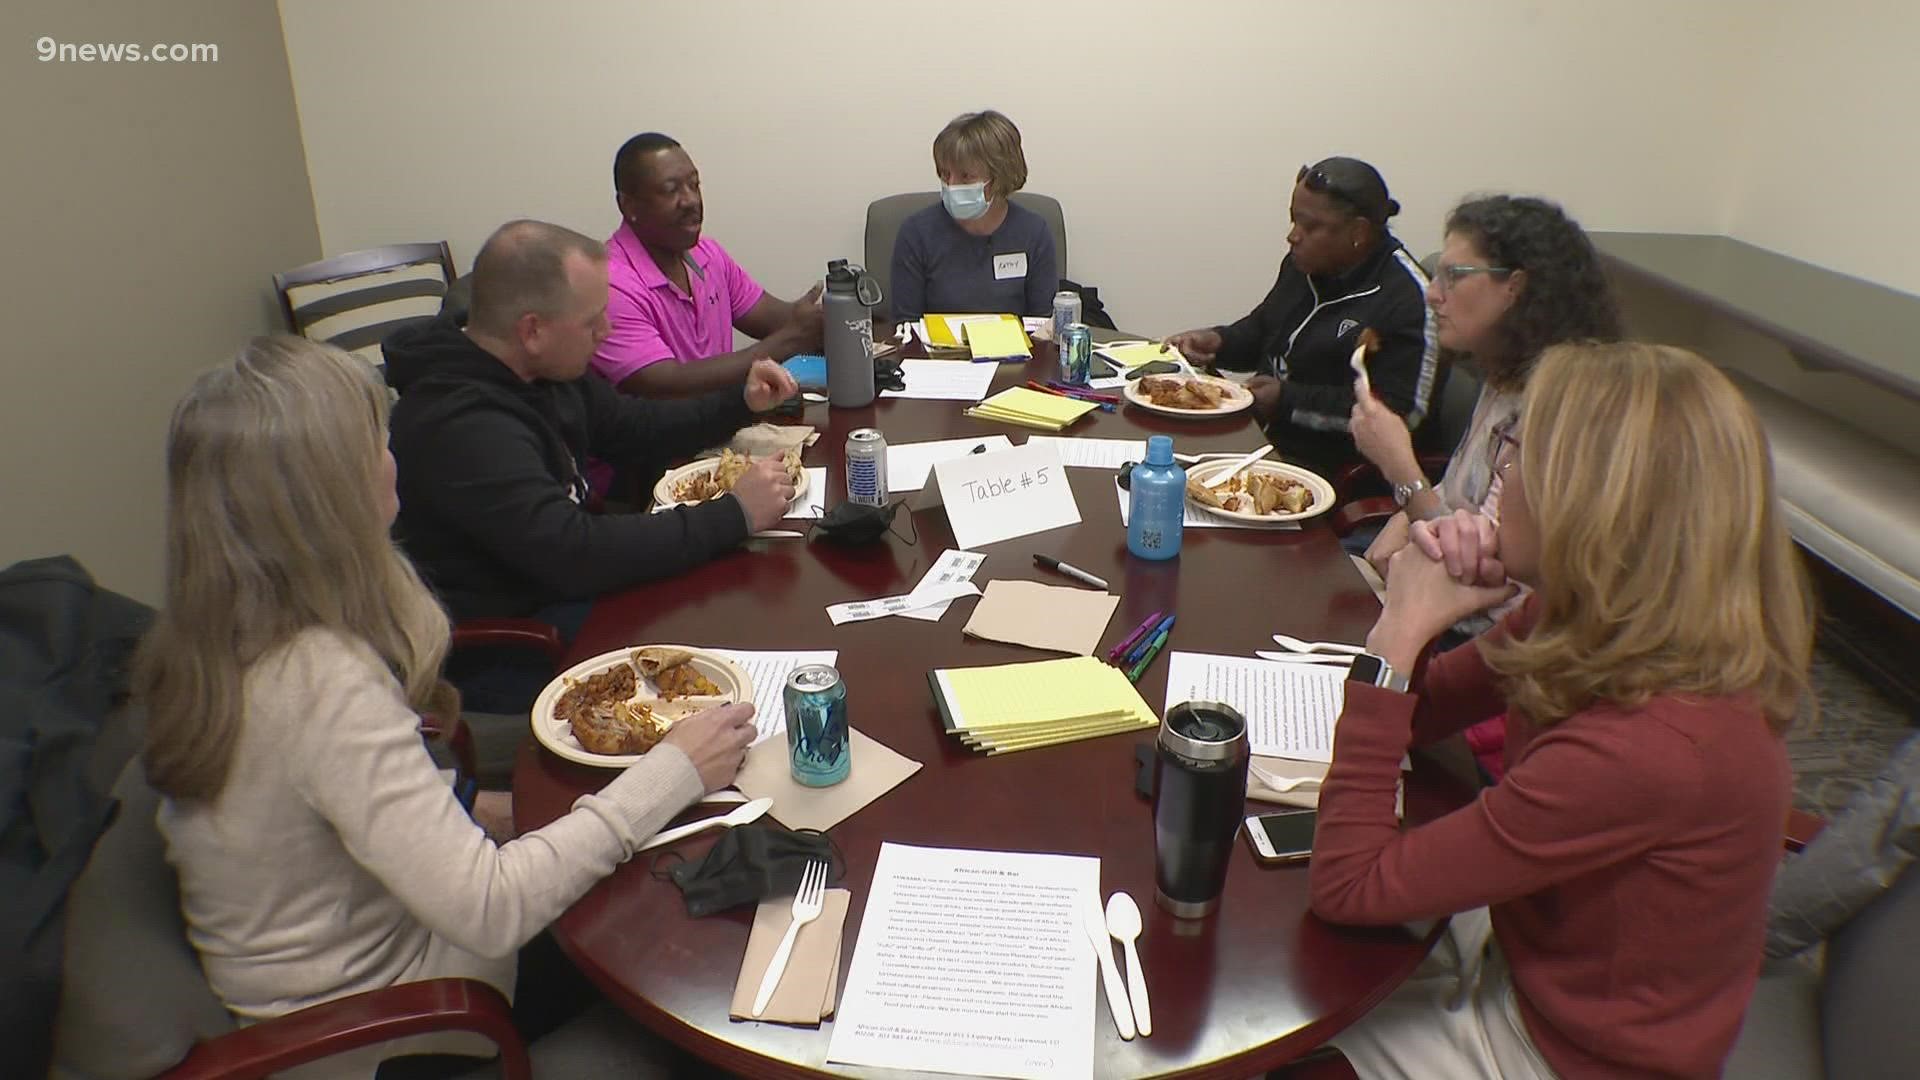 Trinity United Methodist Church has been hosting conversations on race for weeks. These are intentional conversations that follow a Dept. of Justice guide.